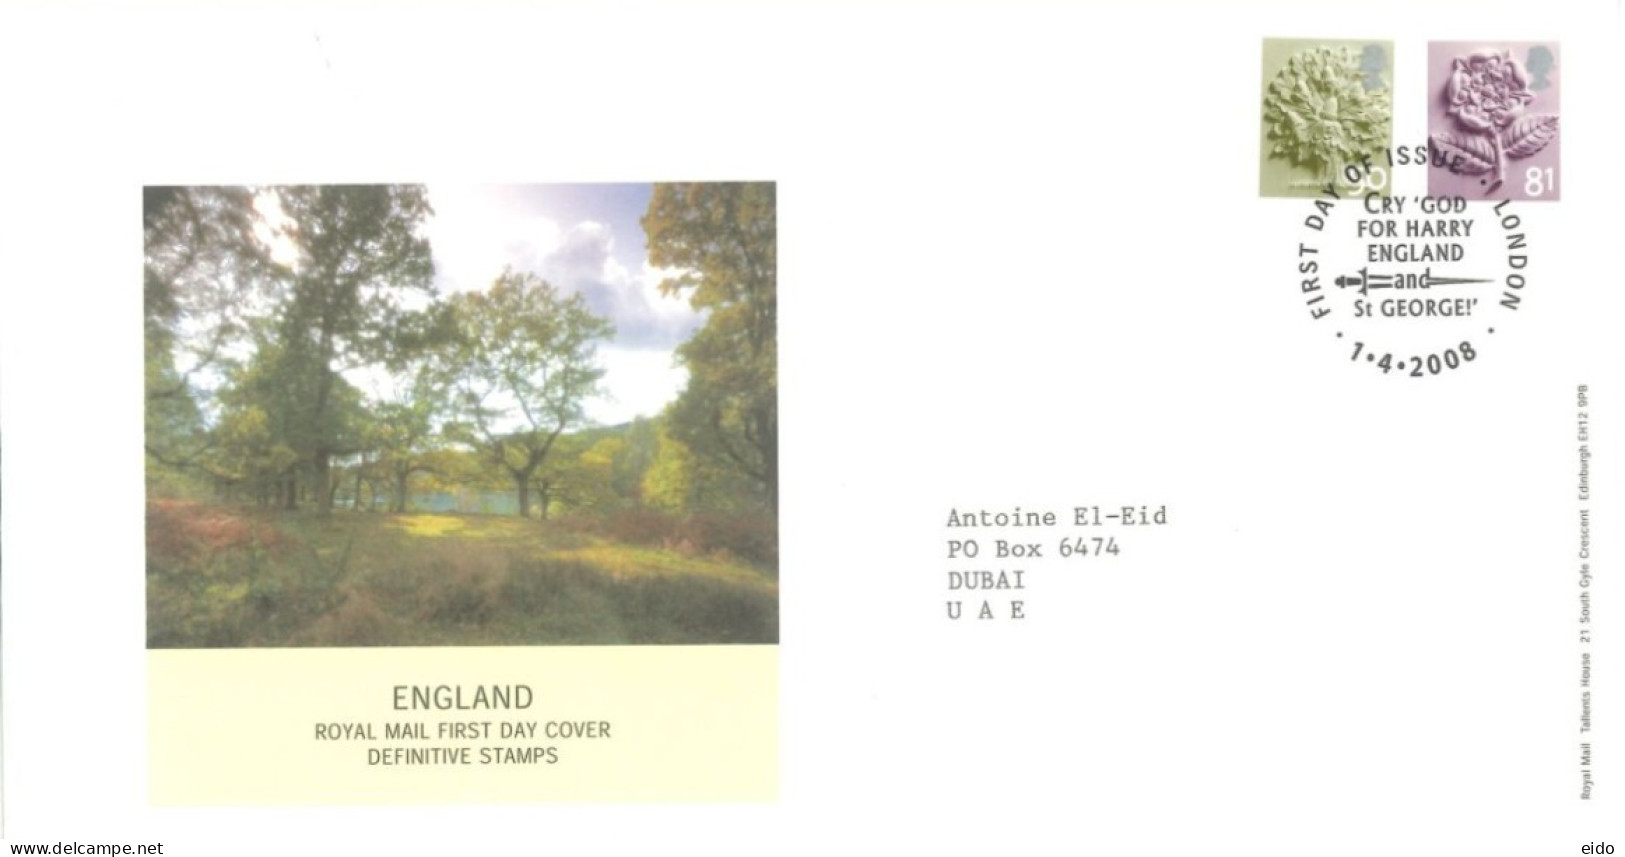 GREAT BRITAIN - 2008, FDC OF ENGLAND ROYAL MAIL DEFINITIVE STAMPS. - Storia Postale